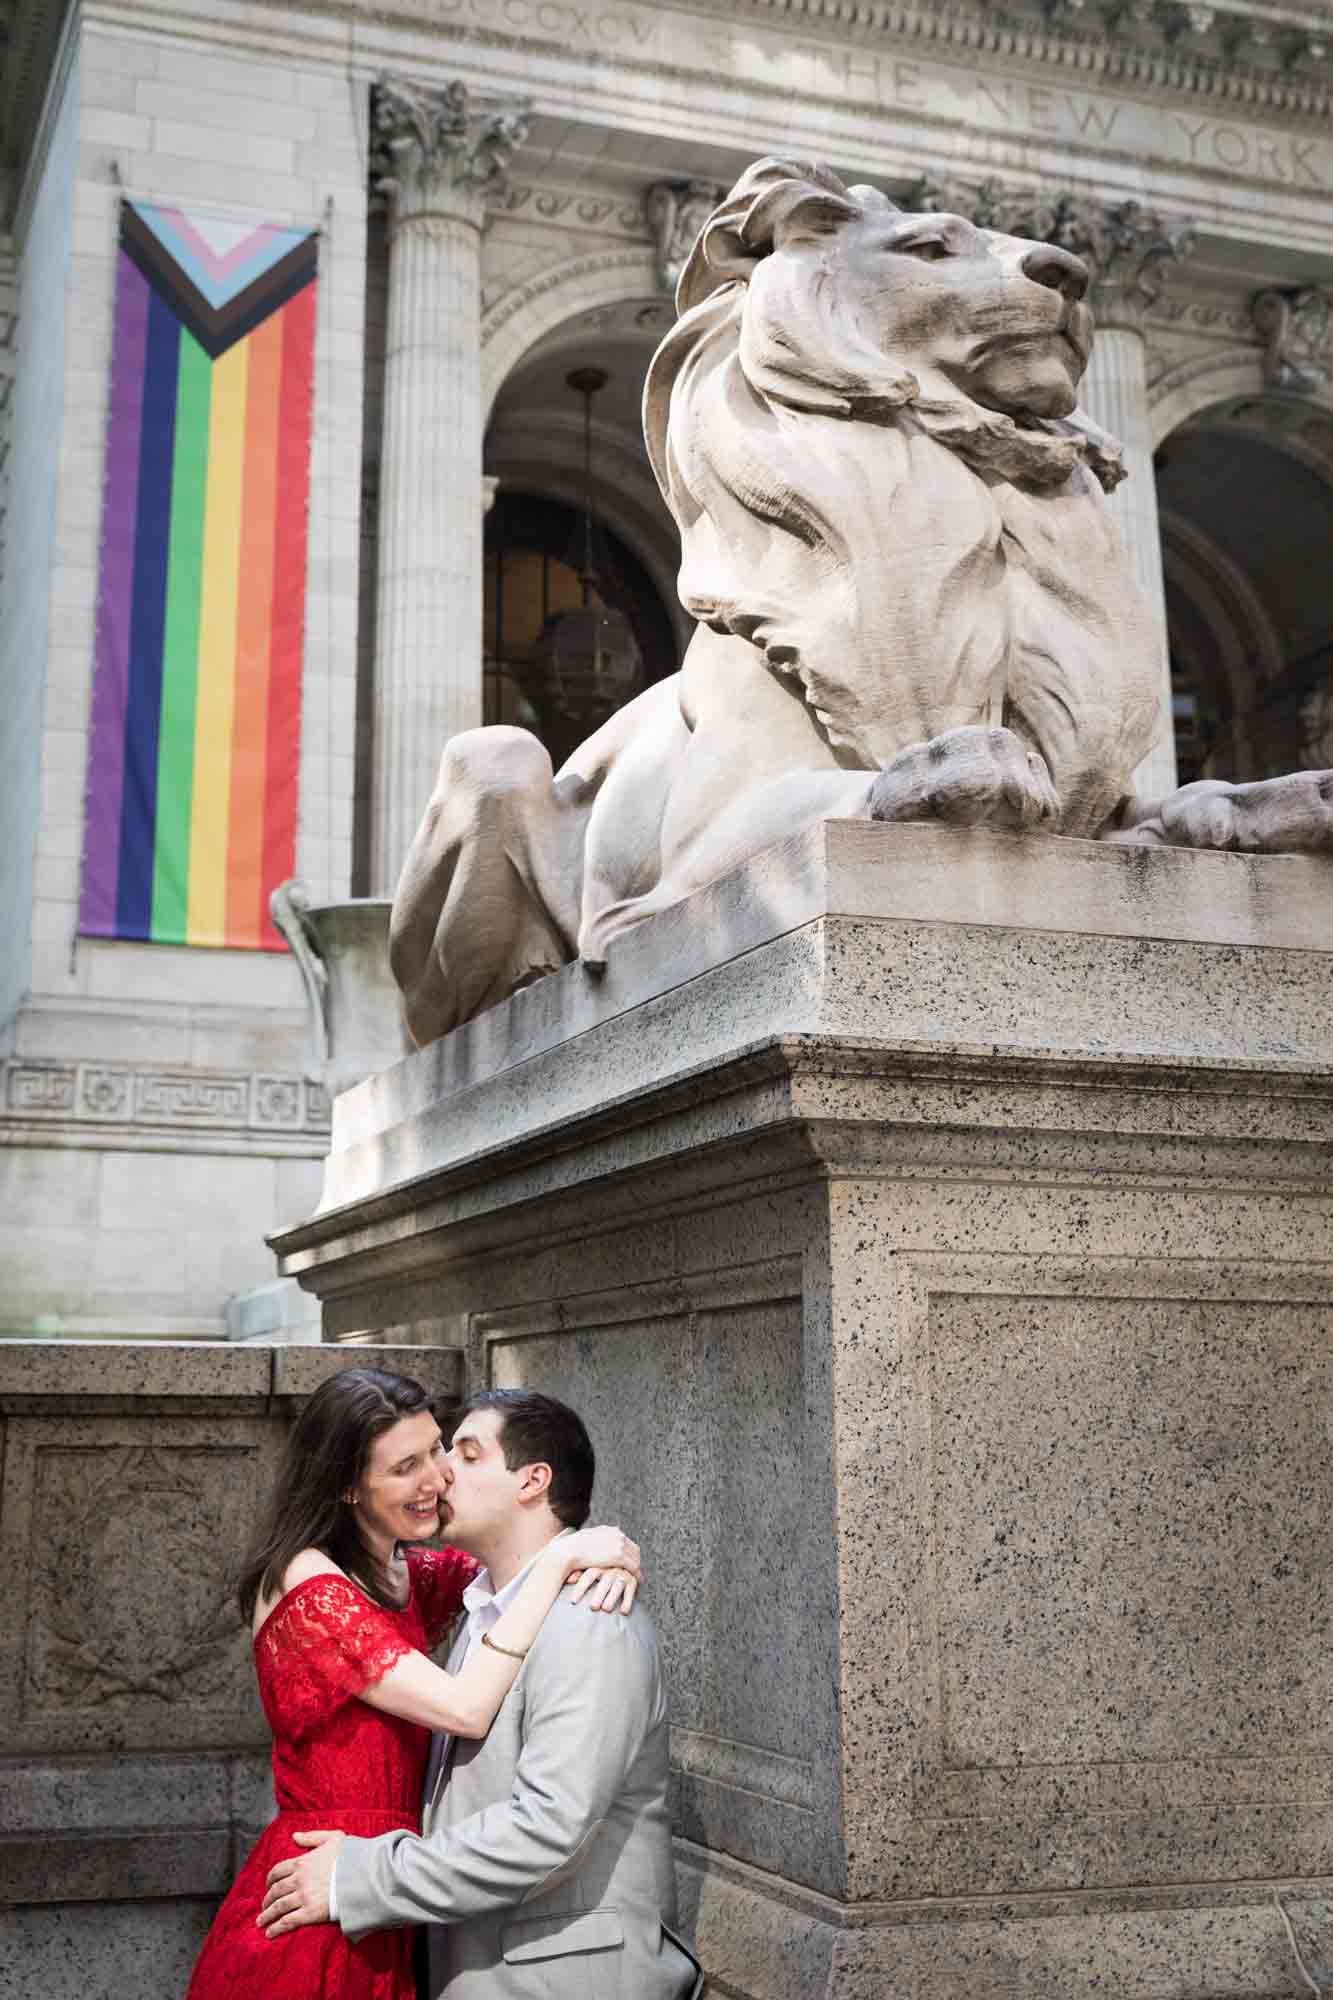 Man in grey jacket kissing woman in red dress below stone lions at New York Public Library proposal